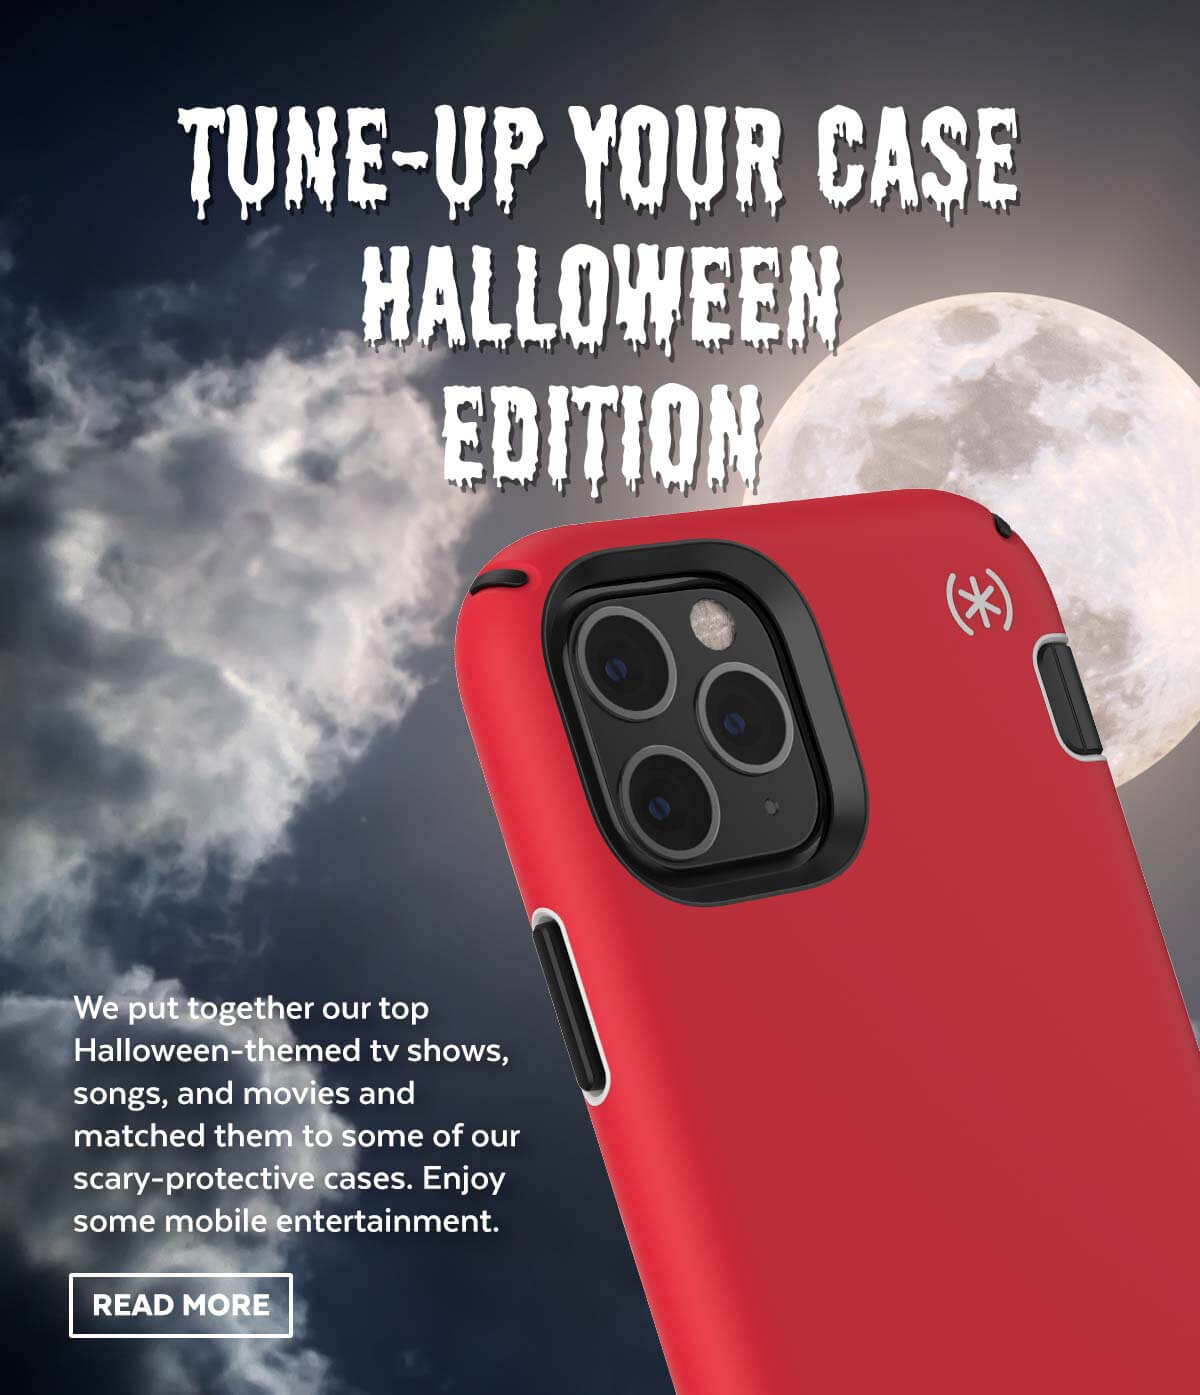 Tune-up your case Halloween edition. We put together our top Halloween-themed tv shows, songs, and movies and matched them to some of our scary-protective cases. Enjoy some mobile entertainment.